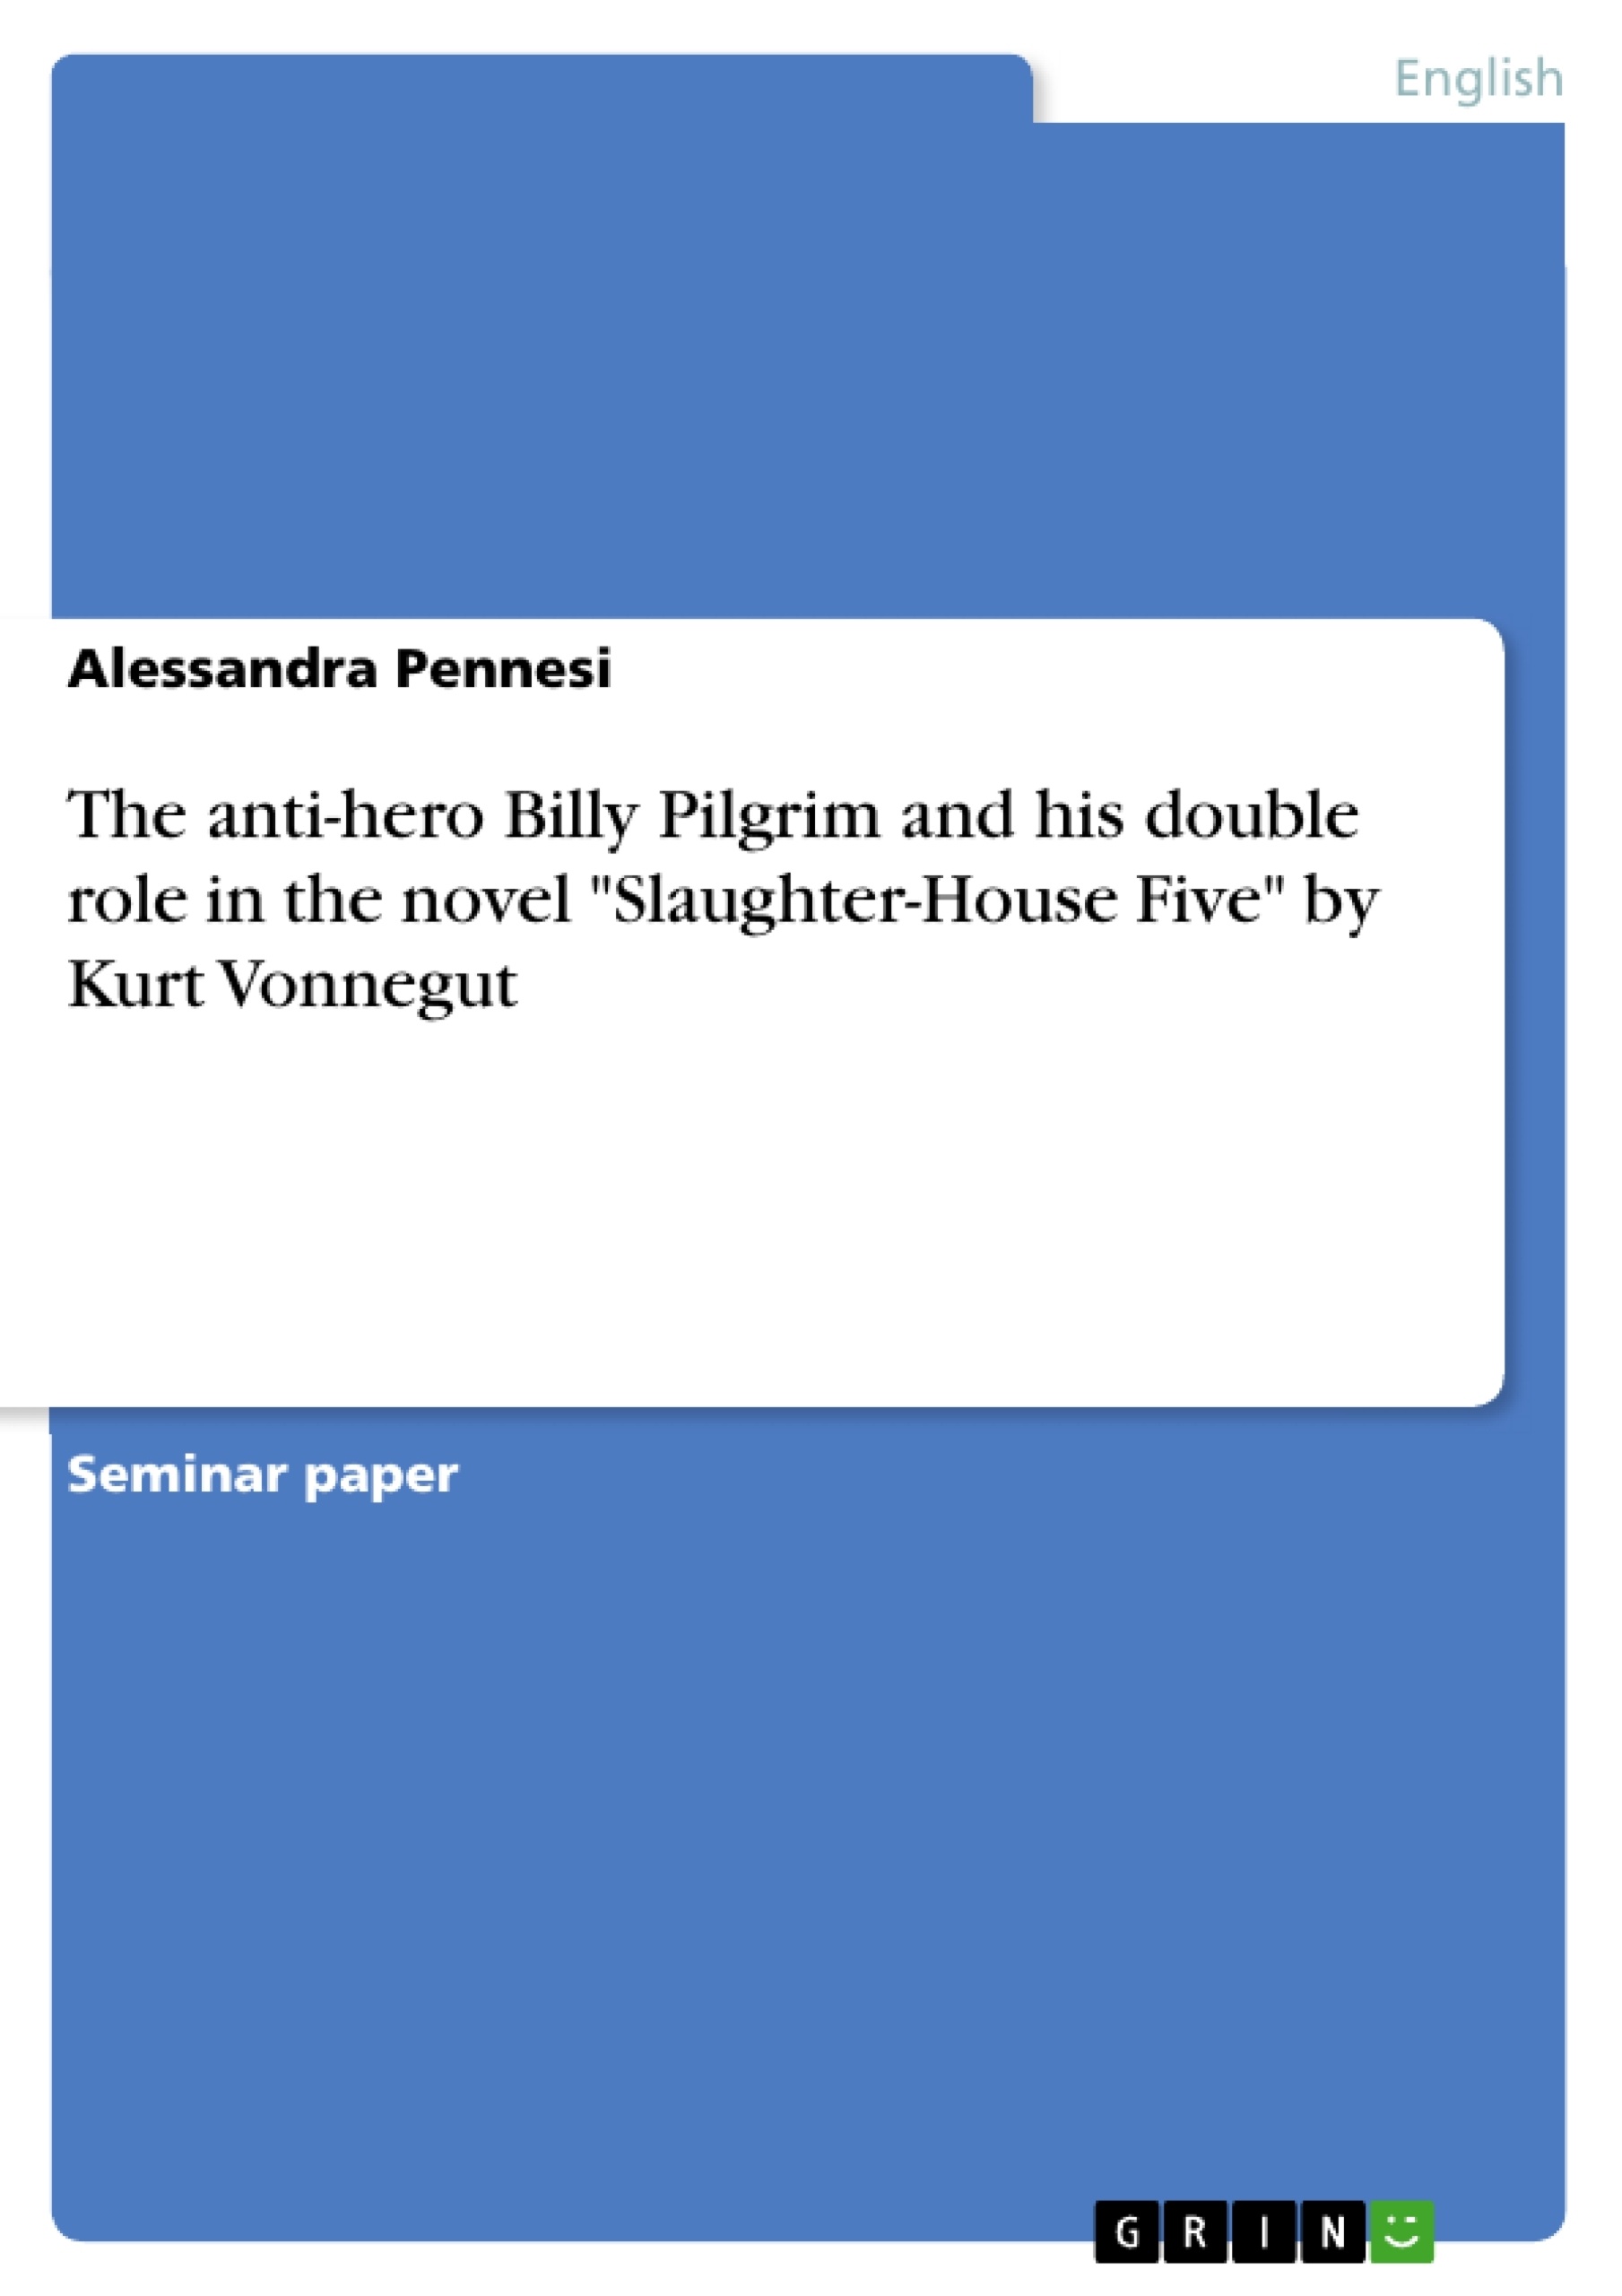 Title: The anti-hero Billy Pilgrim and his double role in the novel "Slaughter-House Five" by Kurt Vonnegut